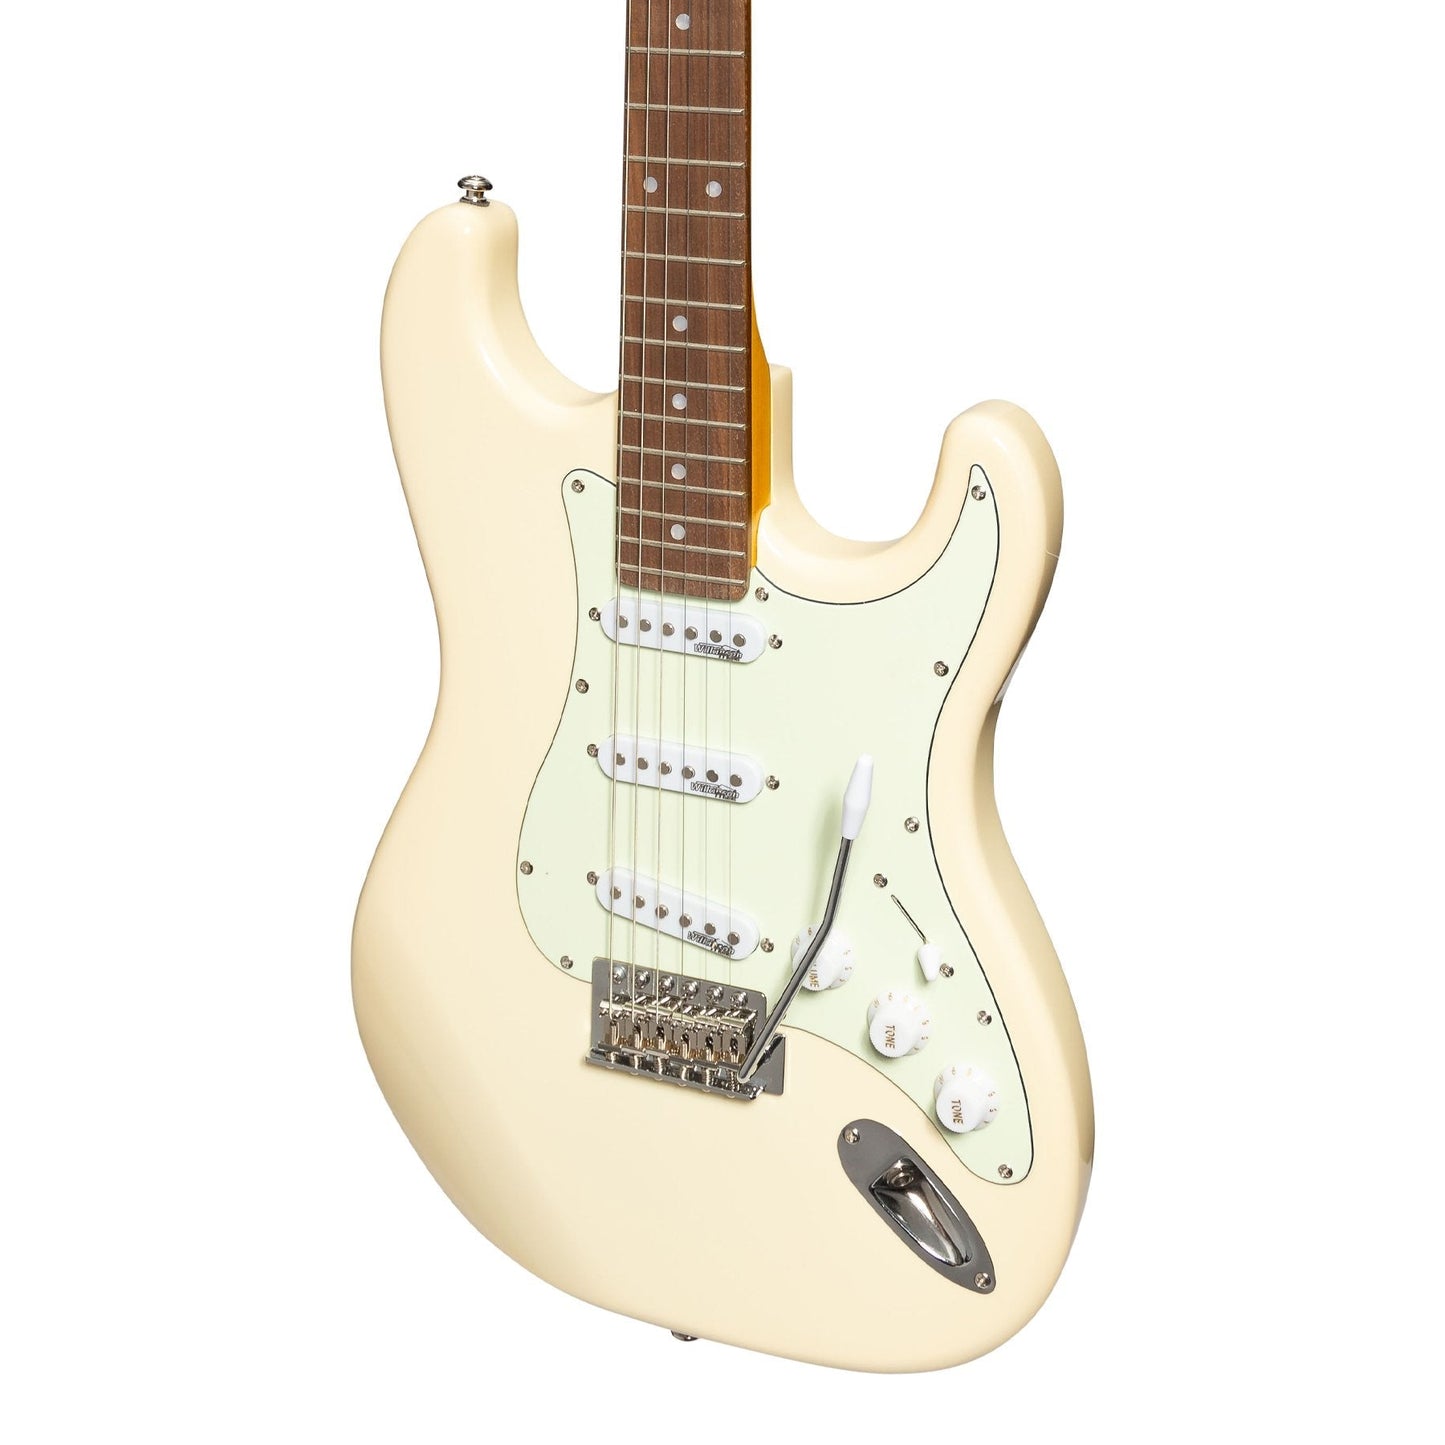 J&D Luthiers Traditional ST-Style Electric Guitar (Vintage White)